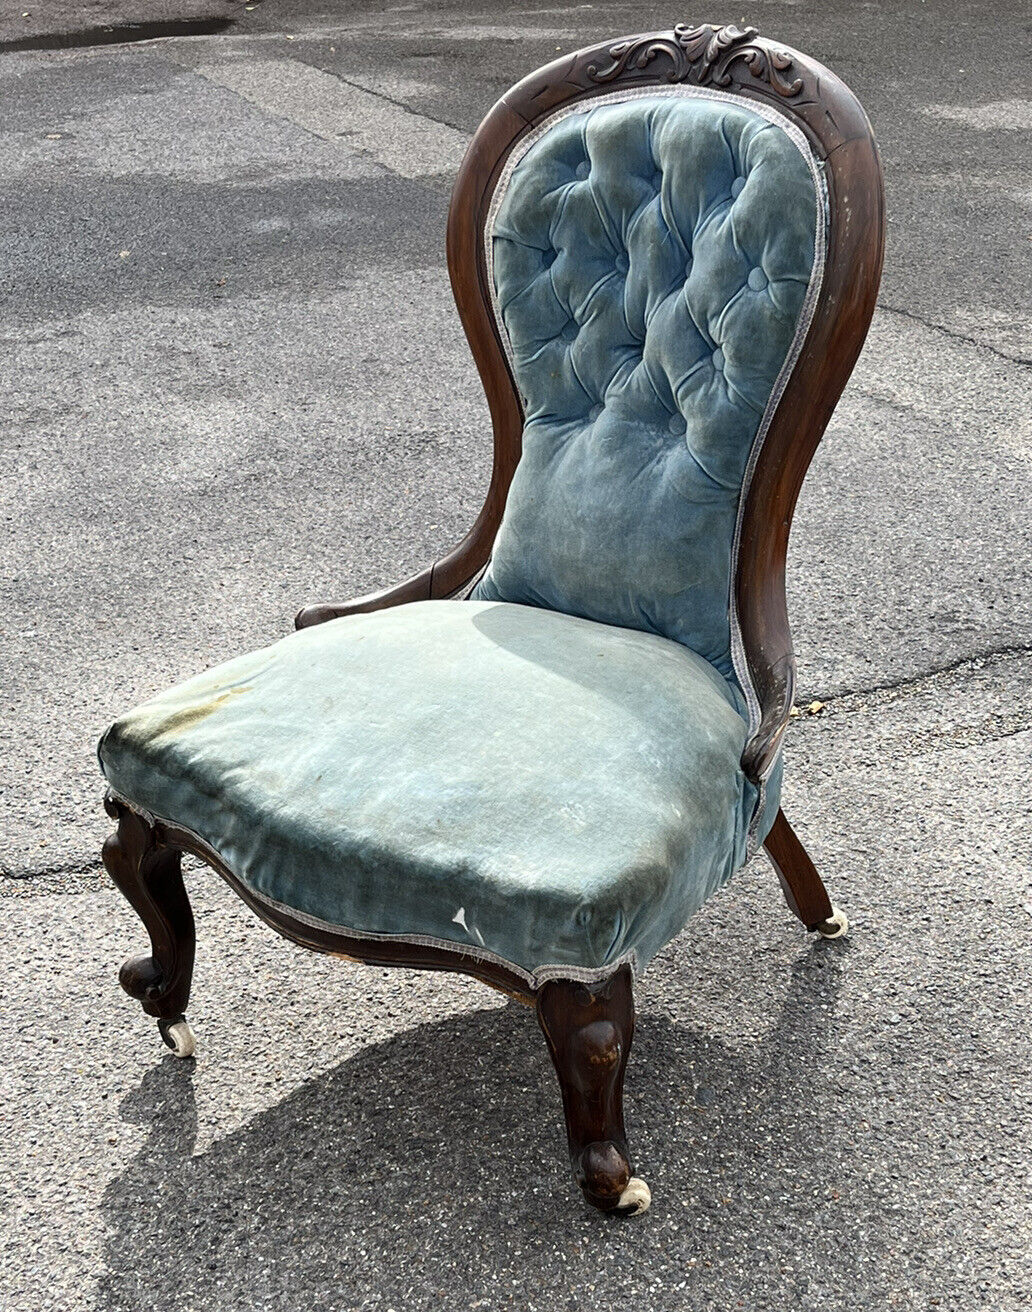 Victorian Mahogany Chair. Ideal Project.